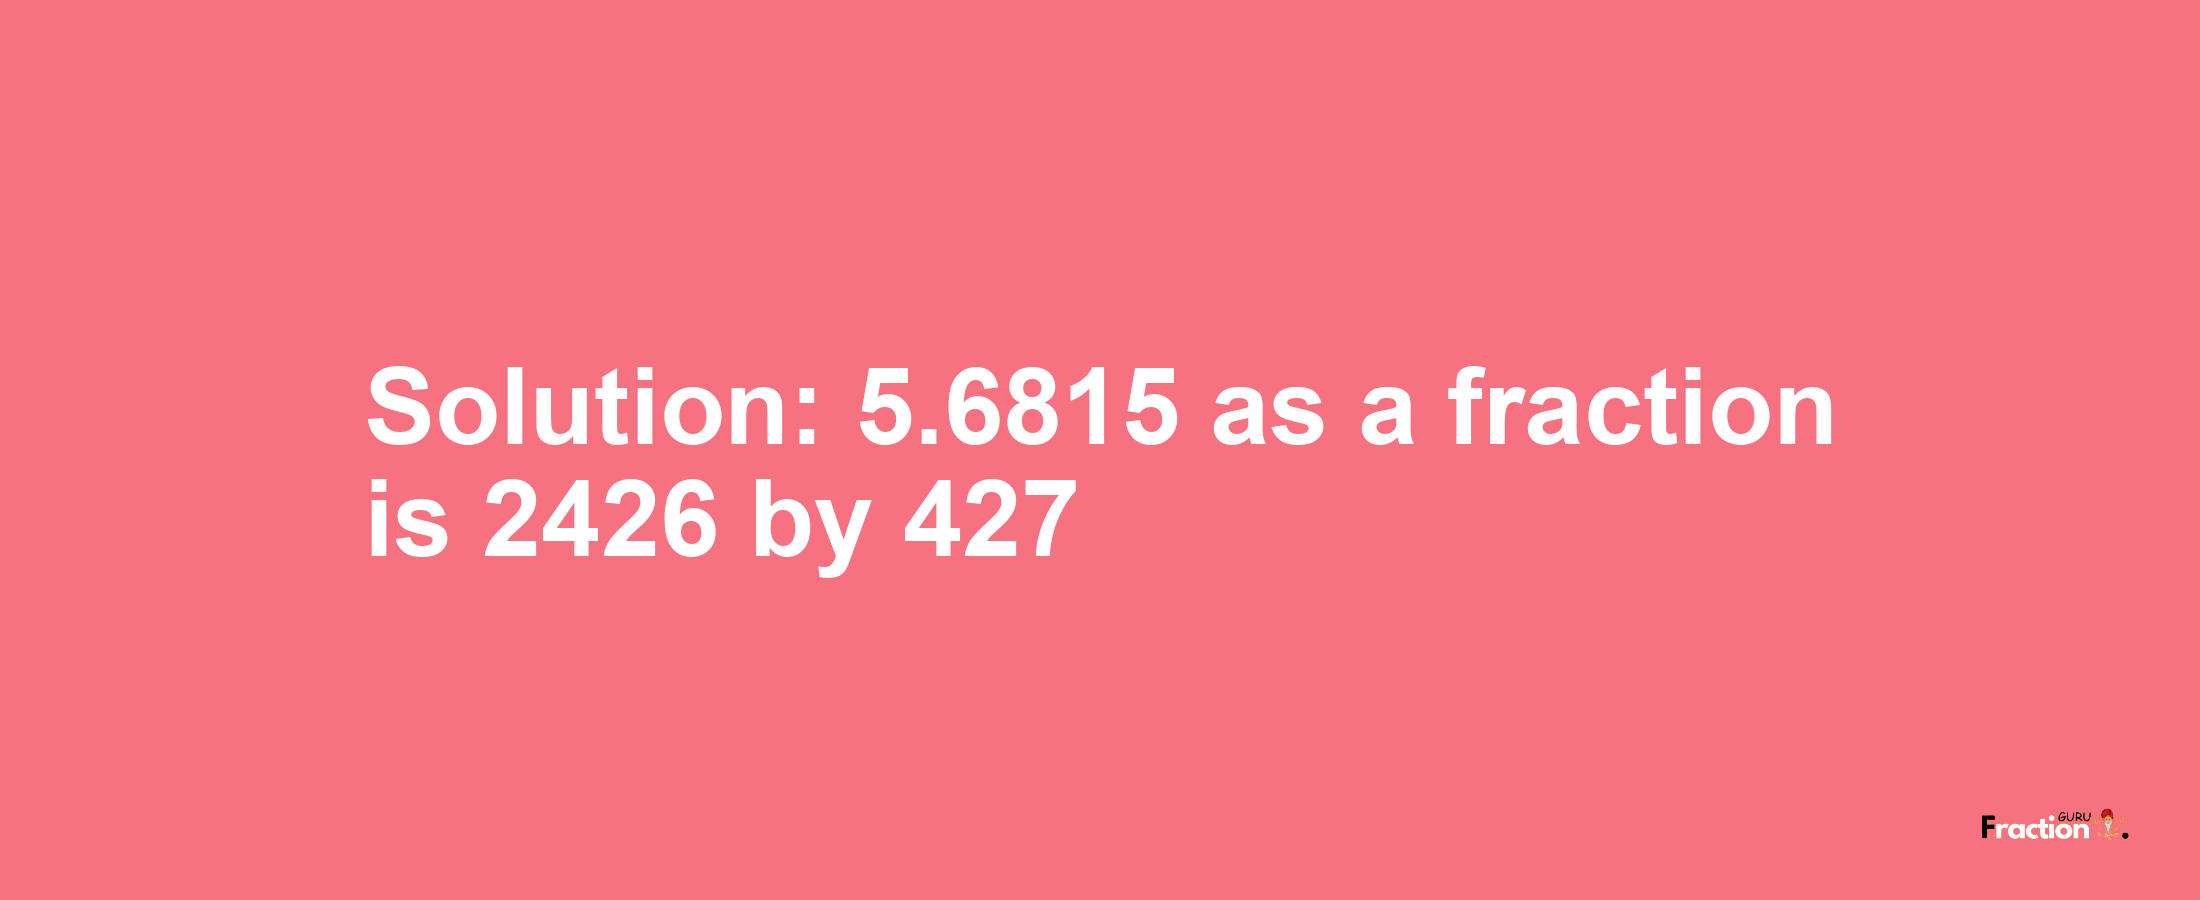 Solution:5.6815 as a fraction is 2426/427